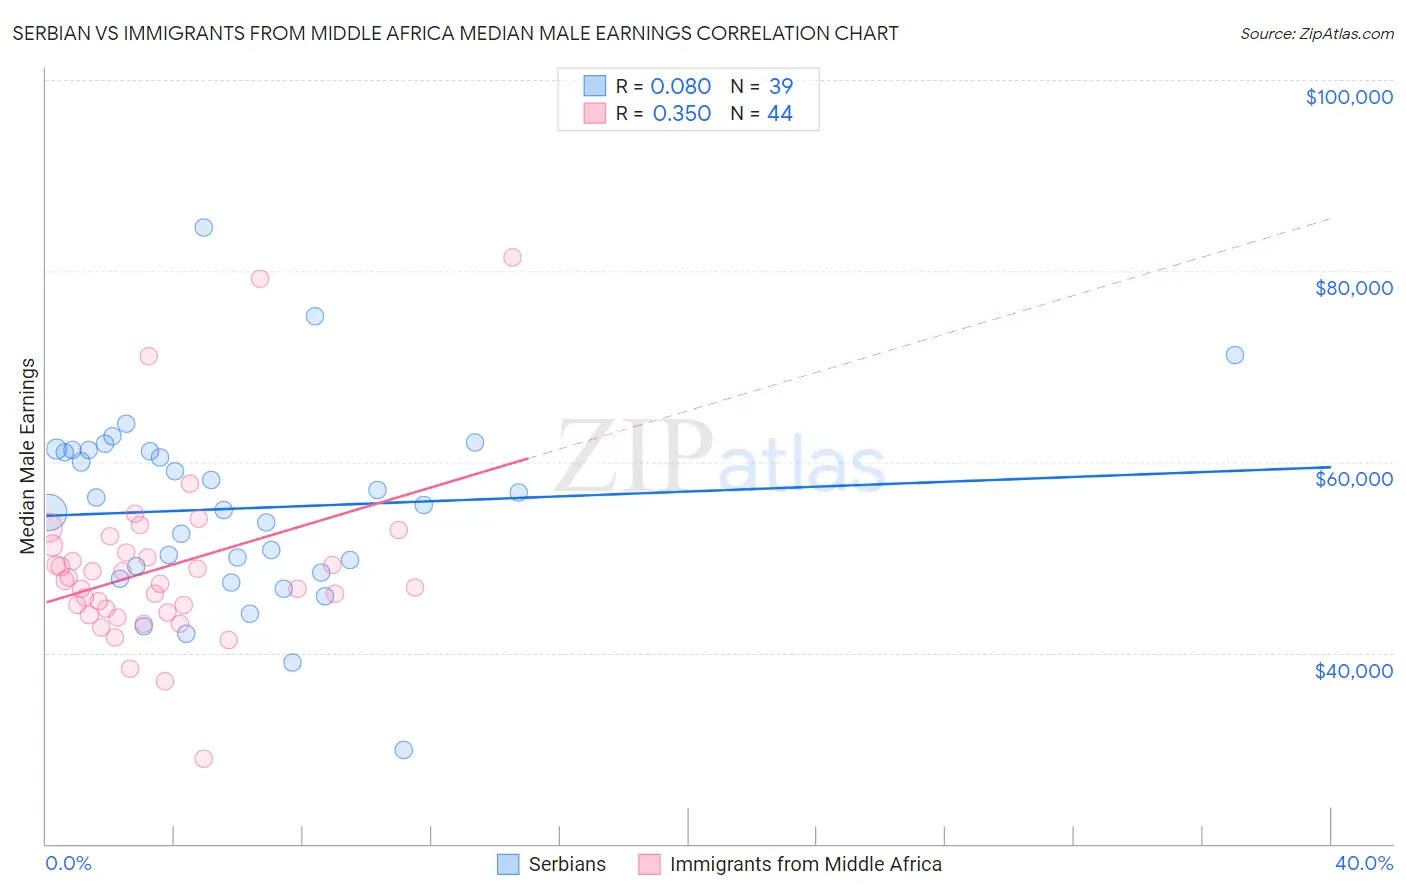 Serbian vs Immigrants from Middle Africa Median Male Earnings